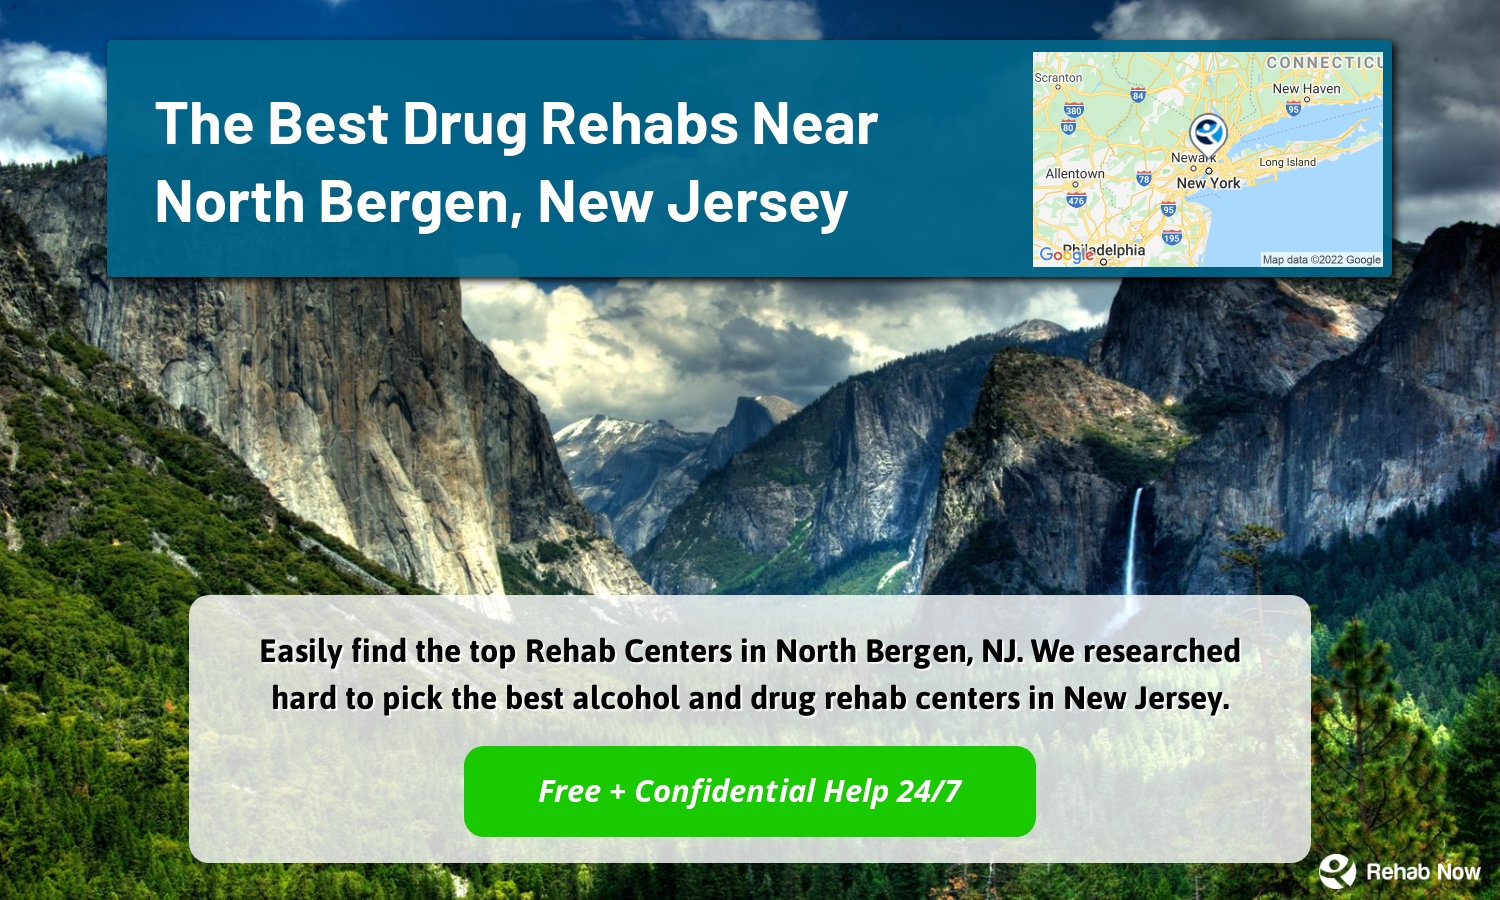 Easily find the top Rehab Centers in North Bergen, NJ. We researched hard to pick the best alcohol and drug rehab centers in New Jersey.